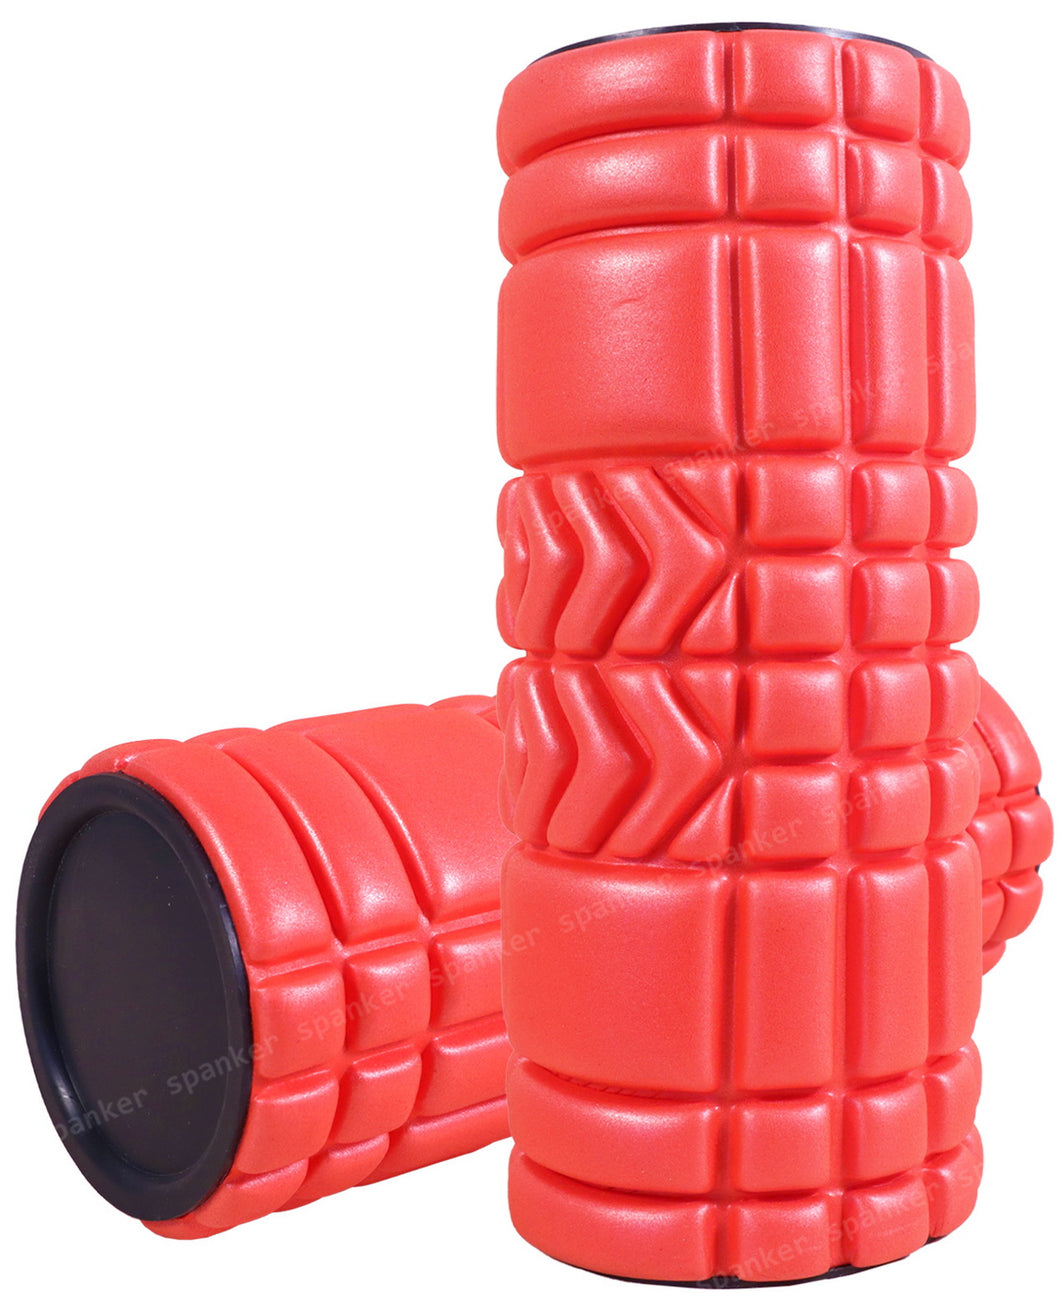 Spanker Foam Yoga Roller for Physical Therapy Exercise, Body Foam Roller, Deep Tissue Massager, Red